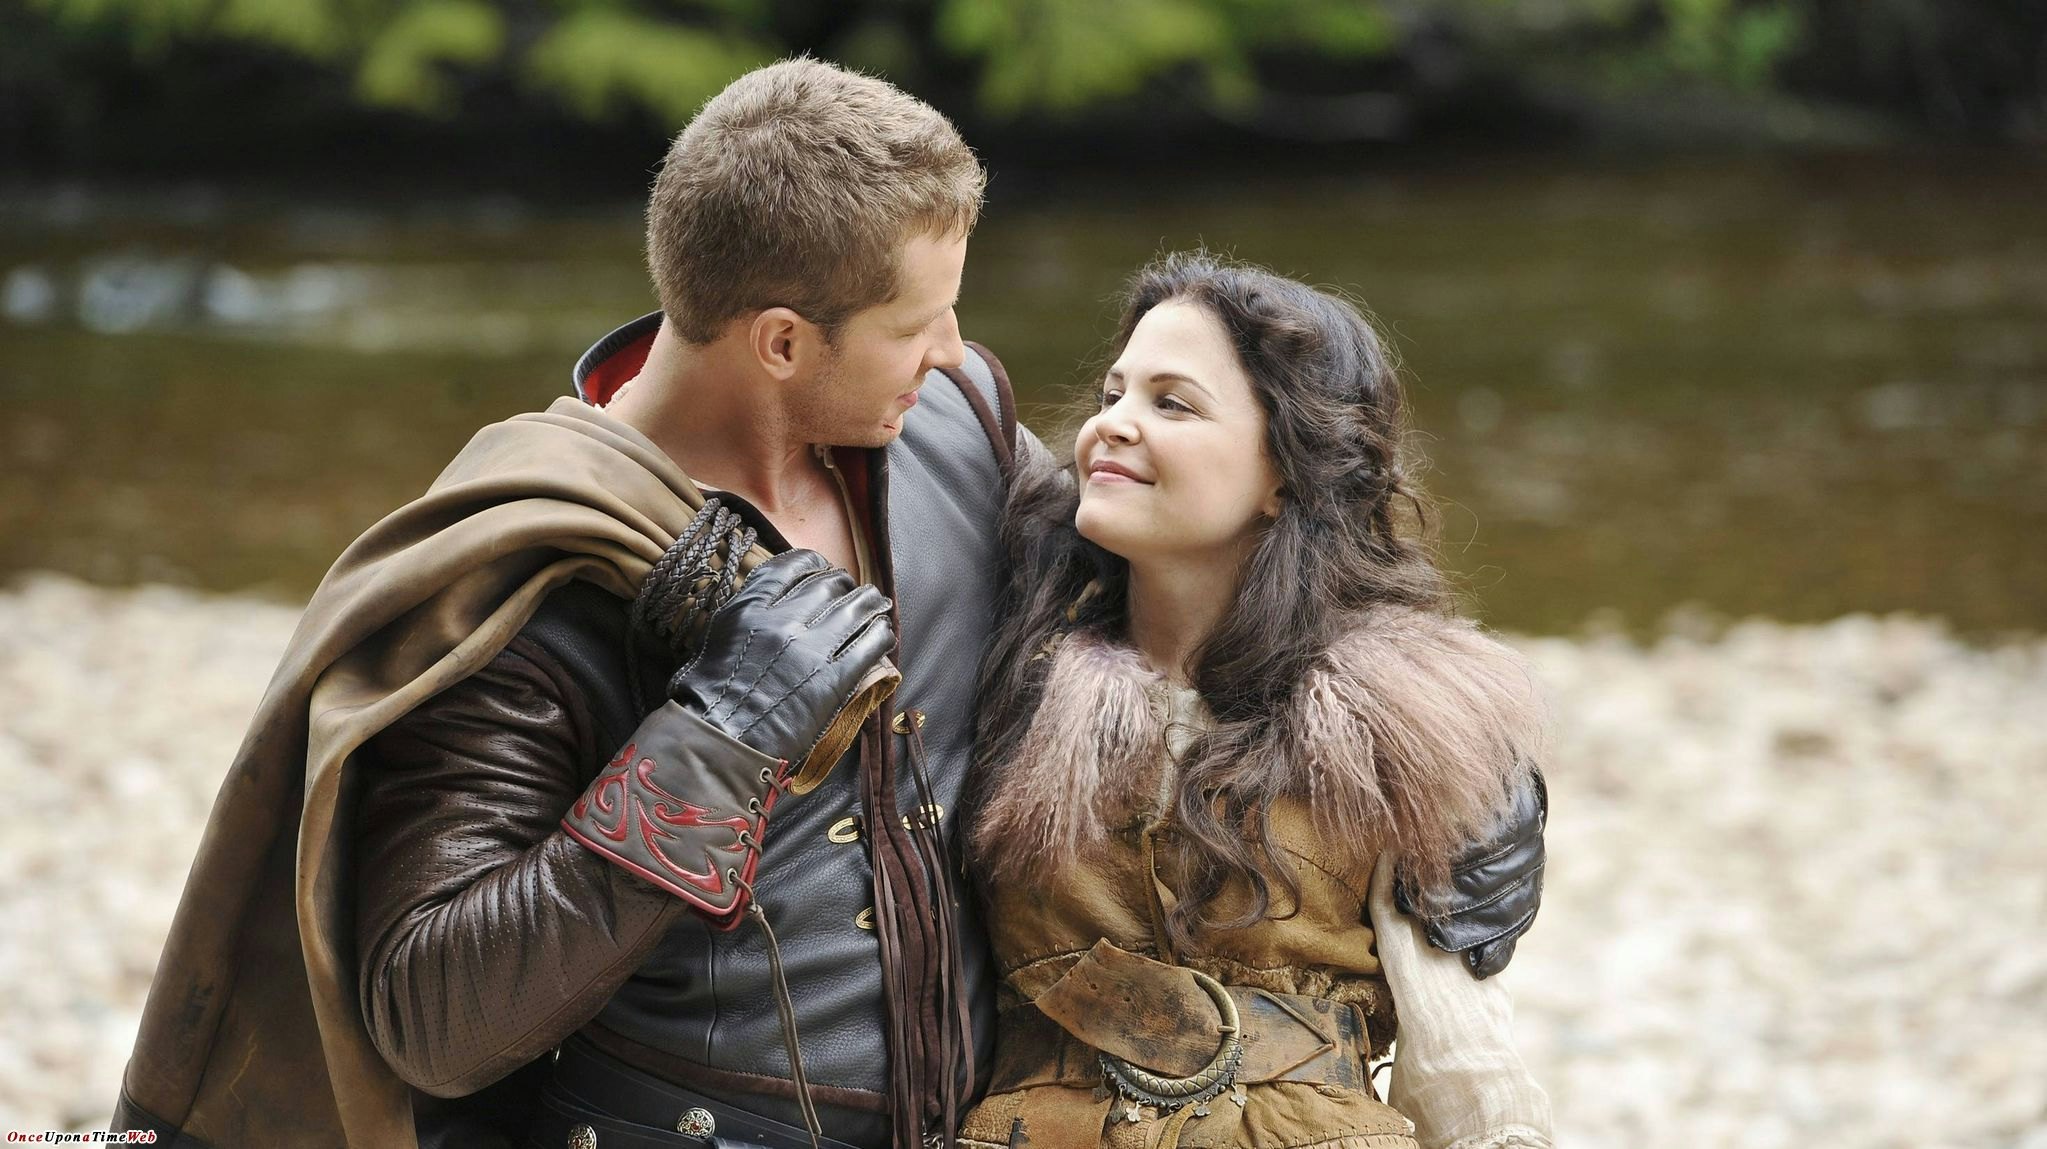 OUAT Prince Charming and Snow White